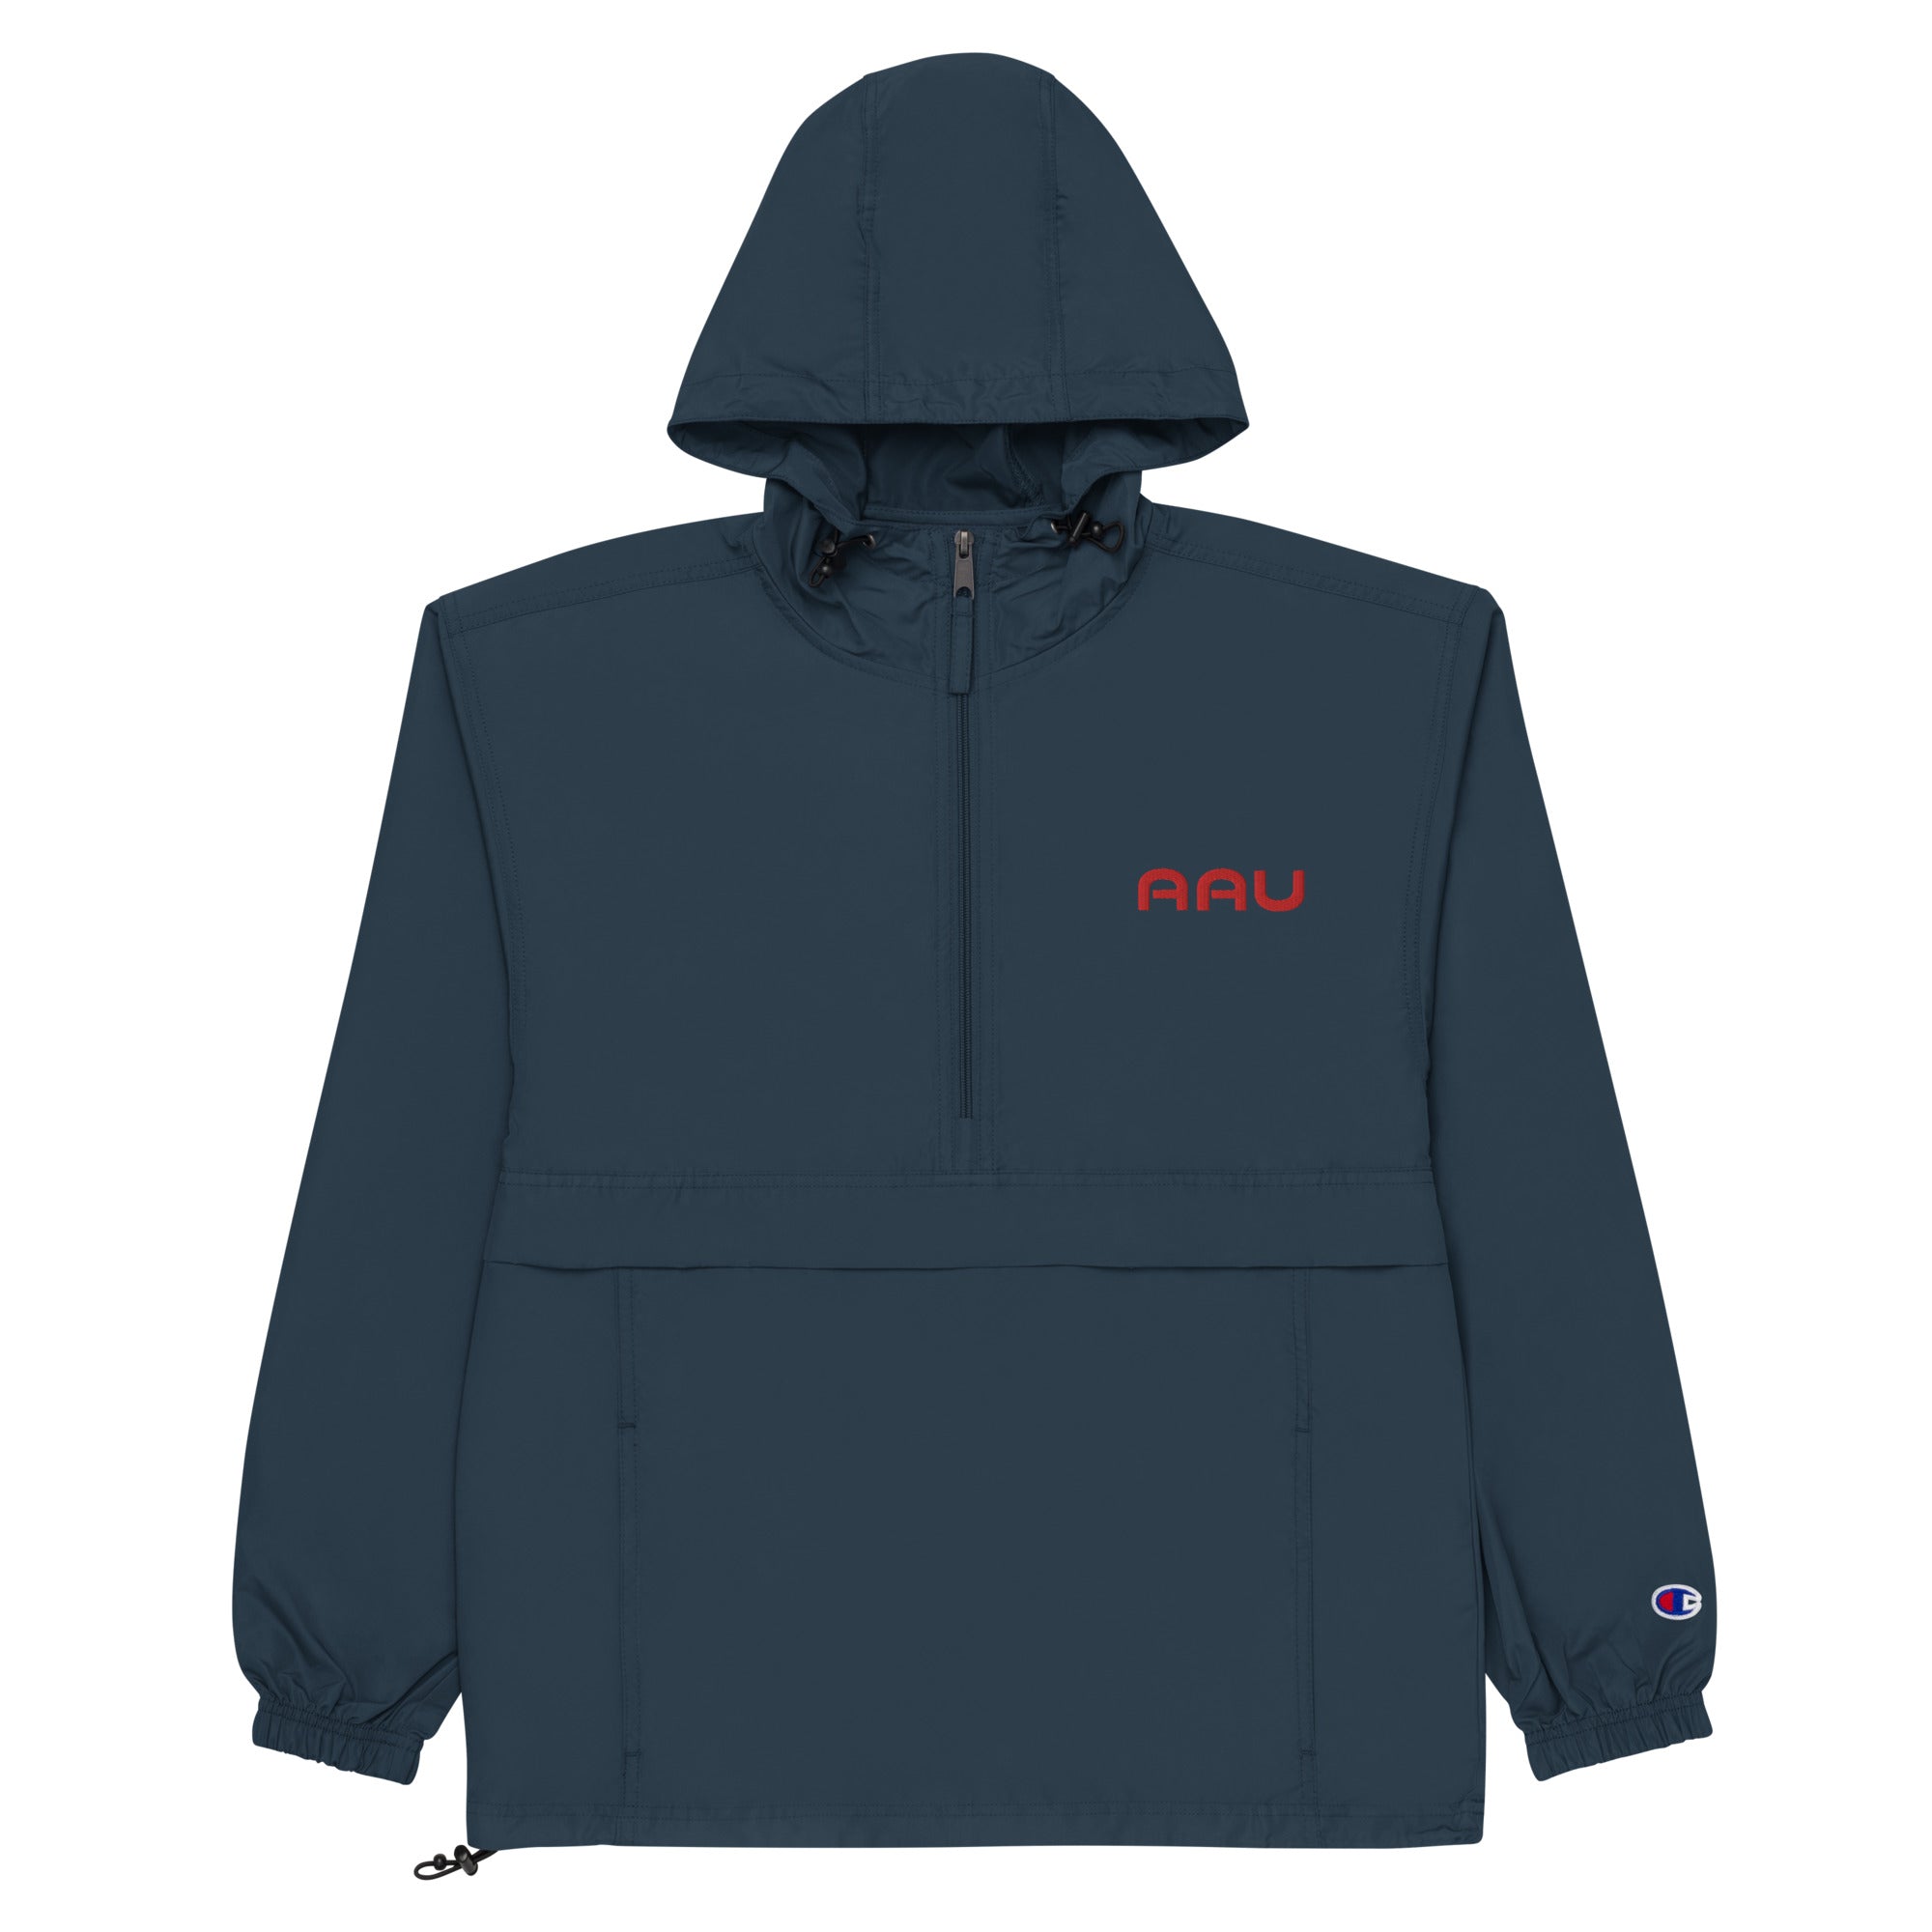 AAU Embroidered Champion Packable Jacket